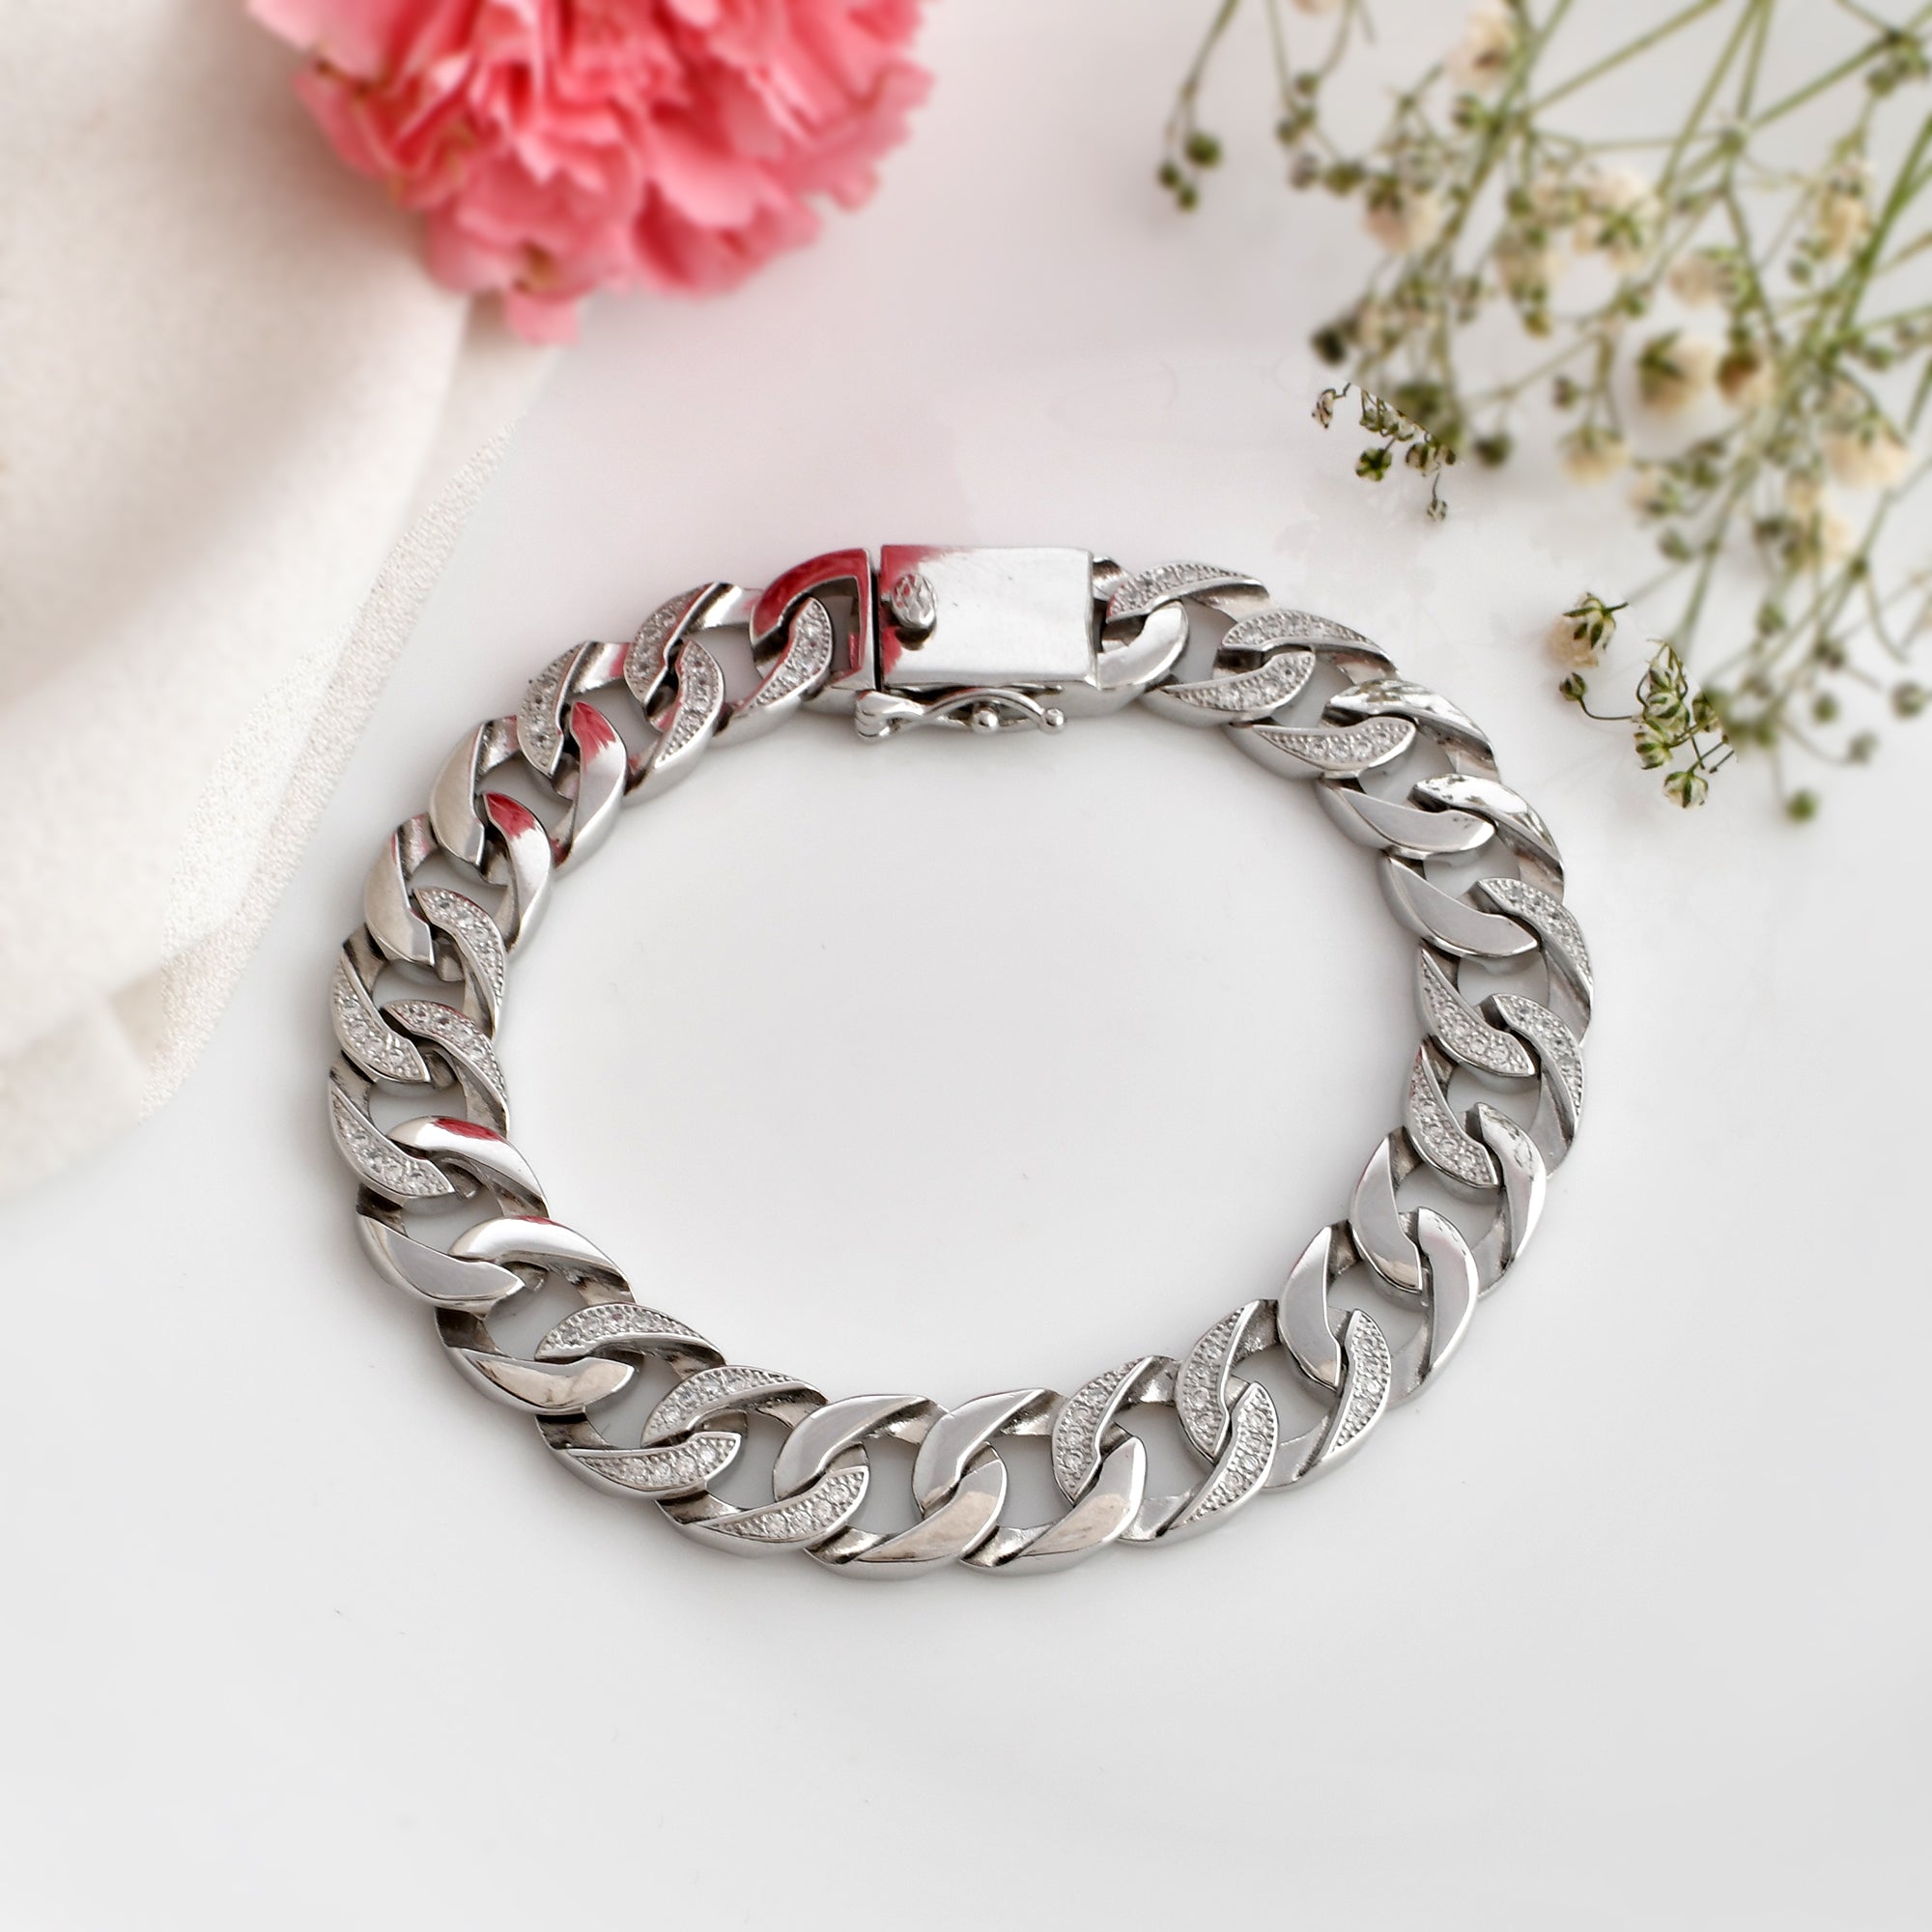 Discover Top-Rated Silver Bracelets for Men | Silveradda